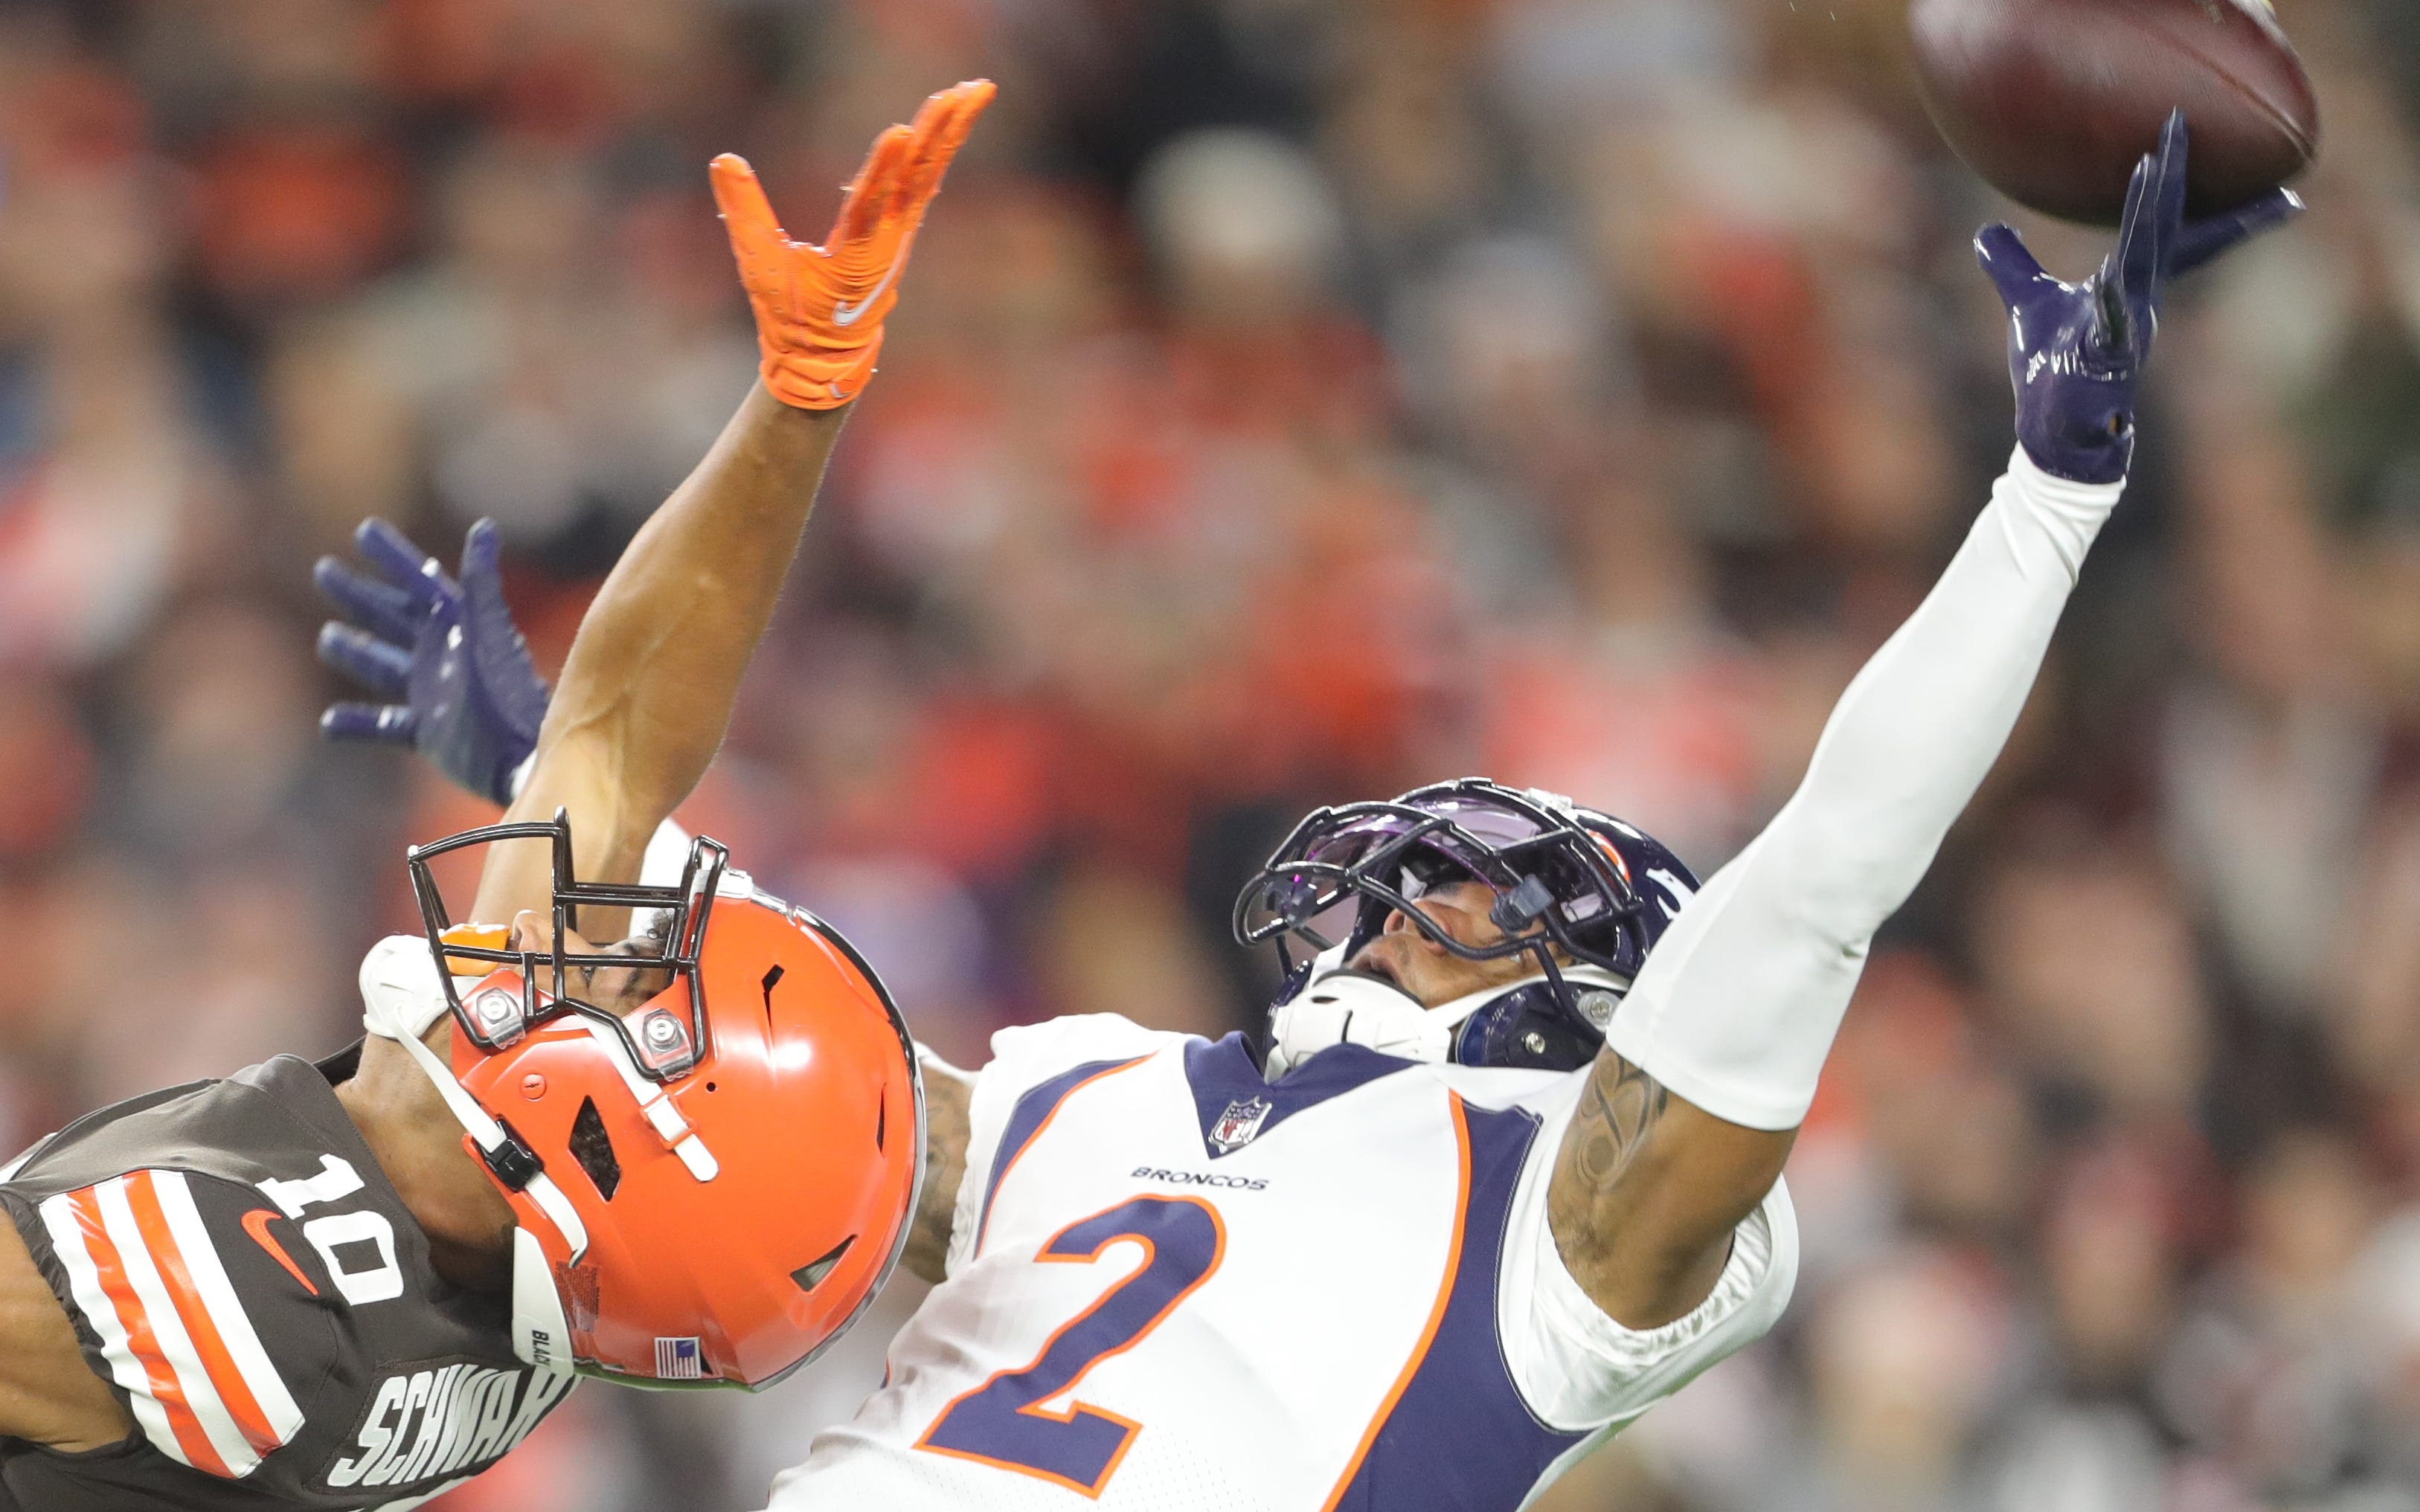 Patrick Surtain defends a pass against the Browns. Credit: Phil Masturzo, USA TODAY Sports.